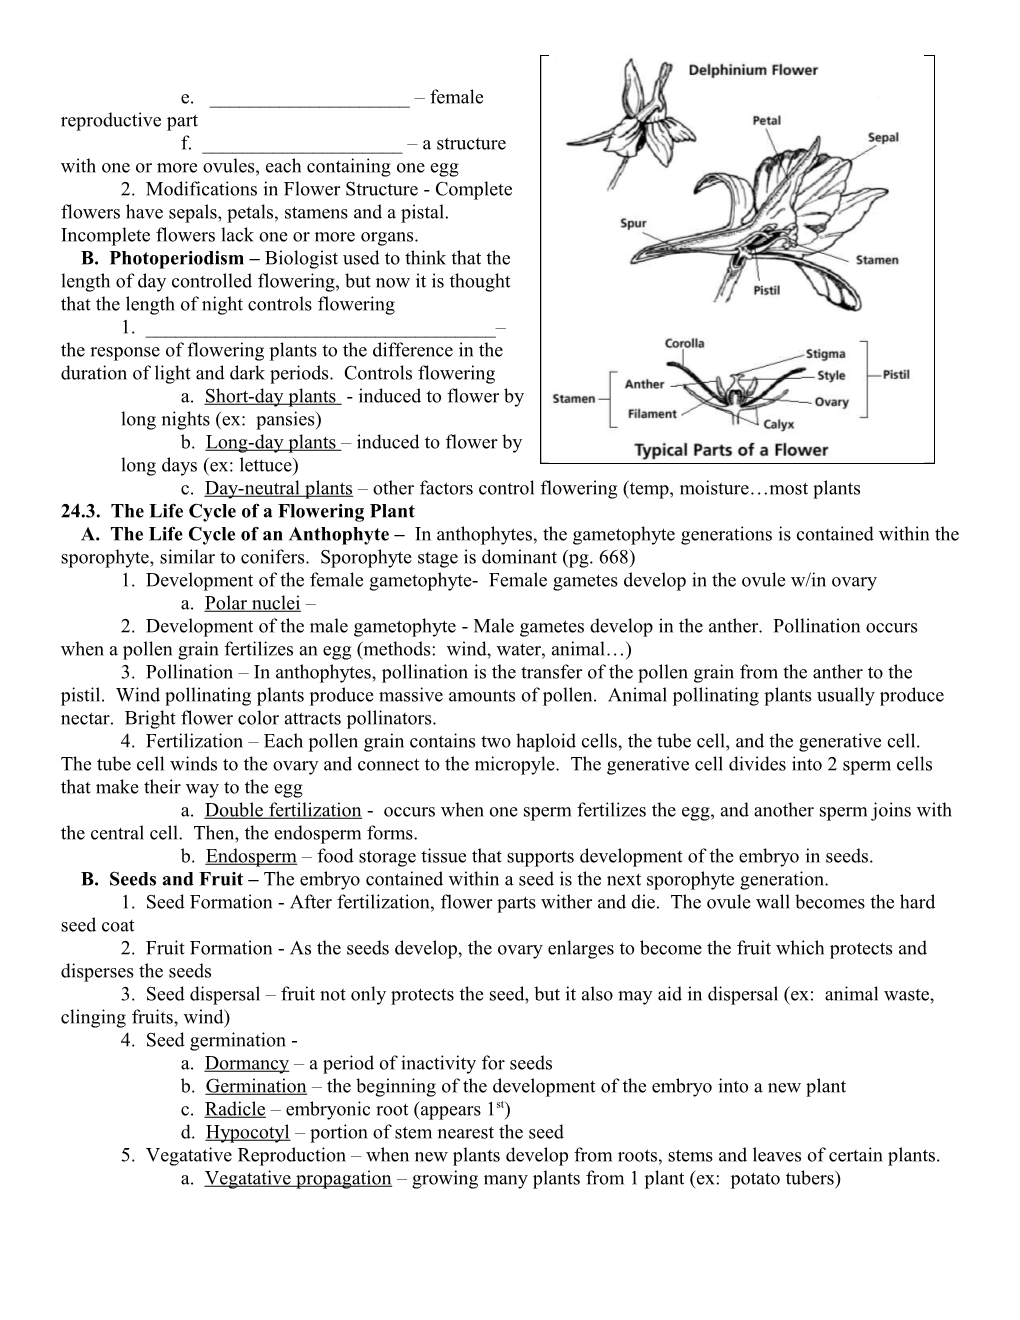 Ch 24 Reproduction in Plants